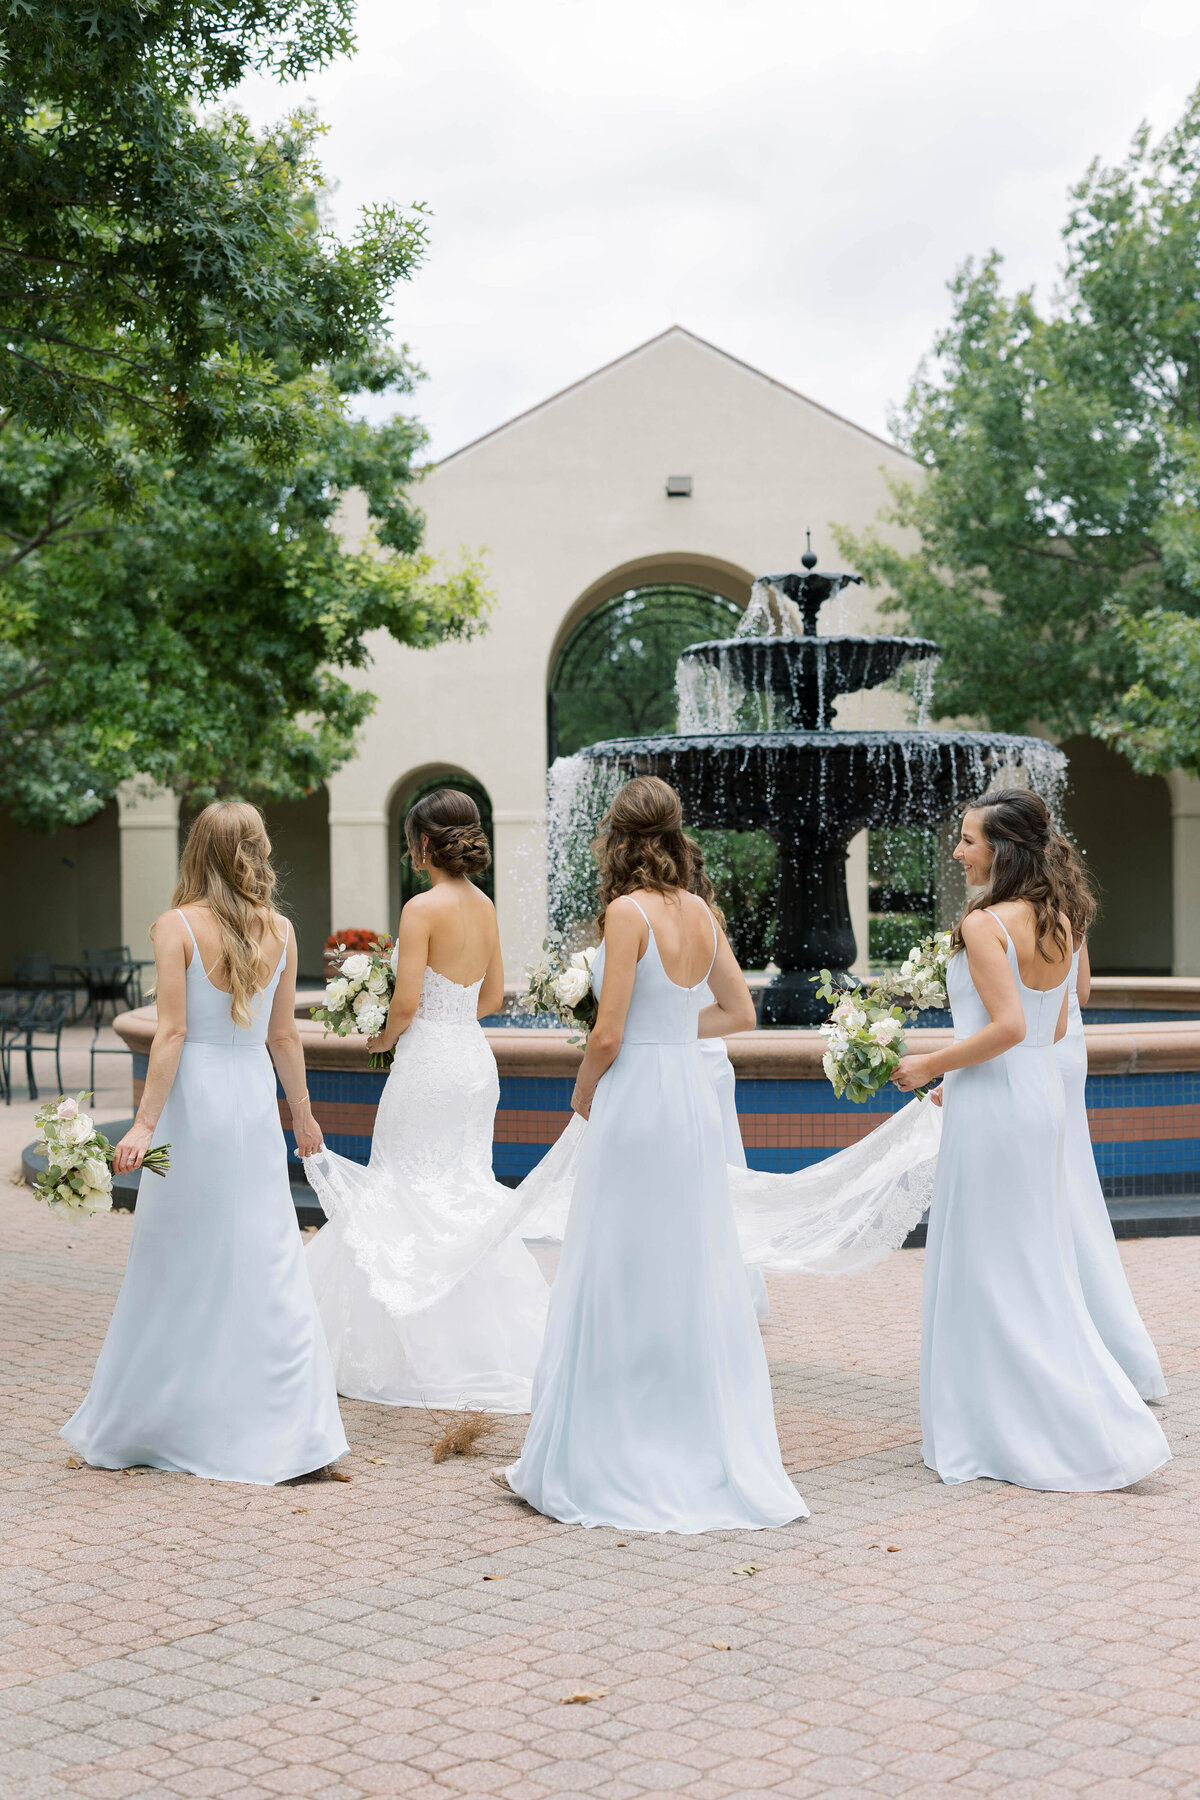 A Wedding at the Omni Mandalay in Irving, Texas - 24